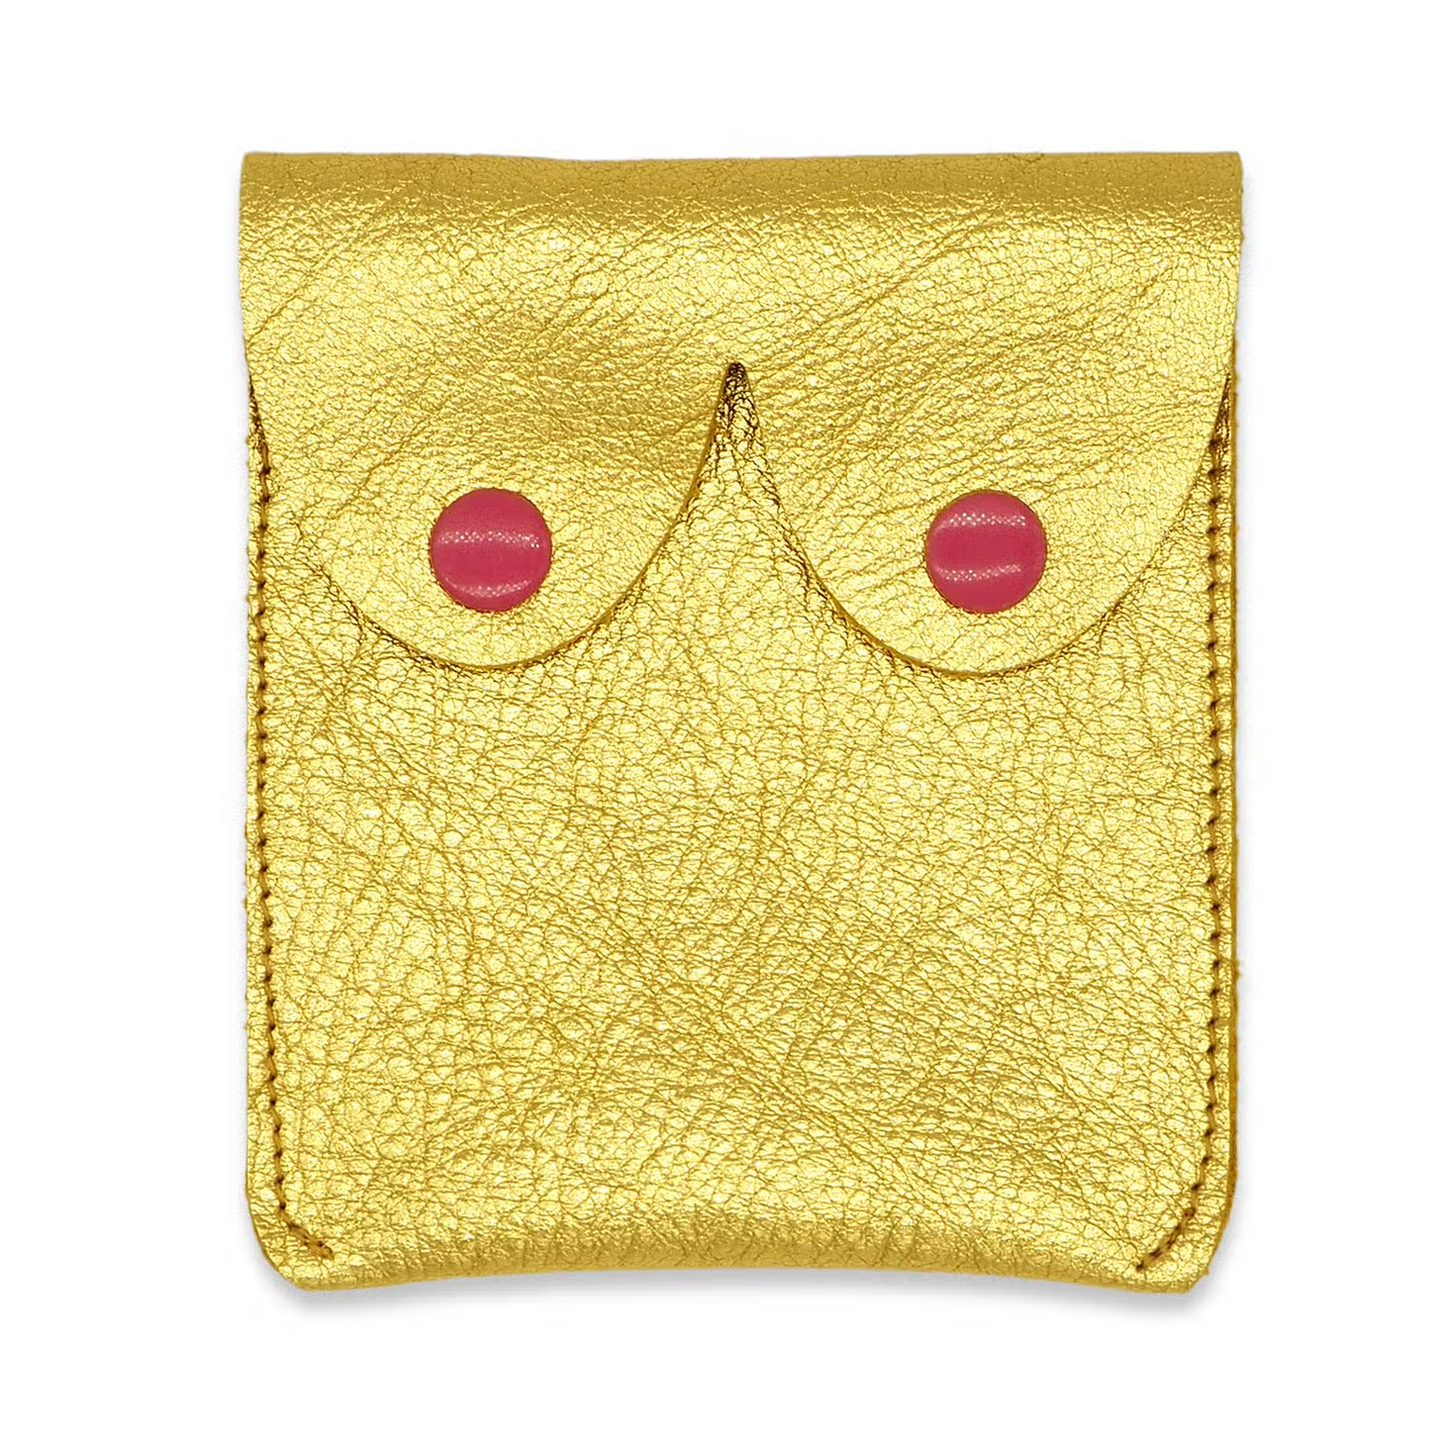 Gold  Boob Pouch with Strap: Leather Feminist Coin Purse